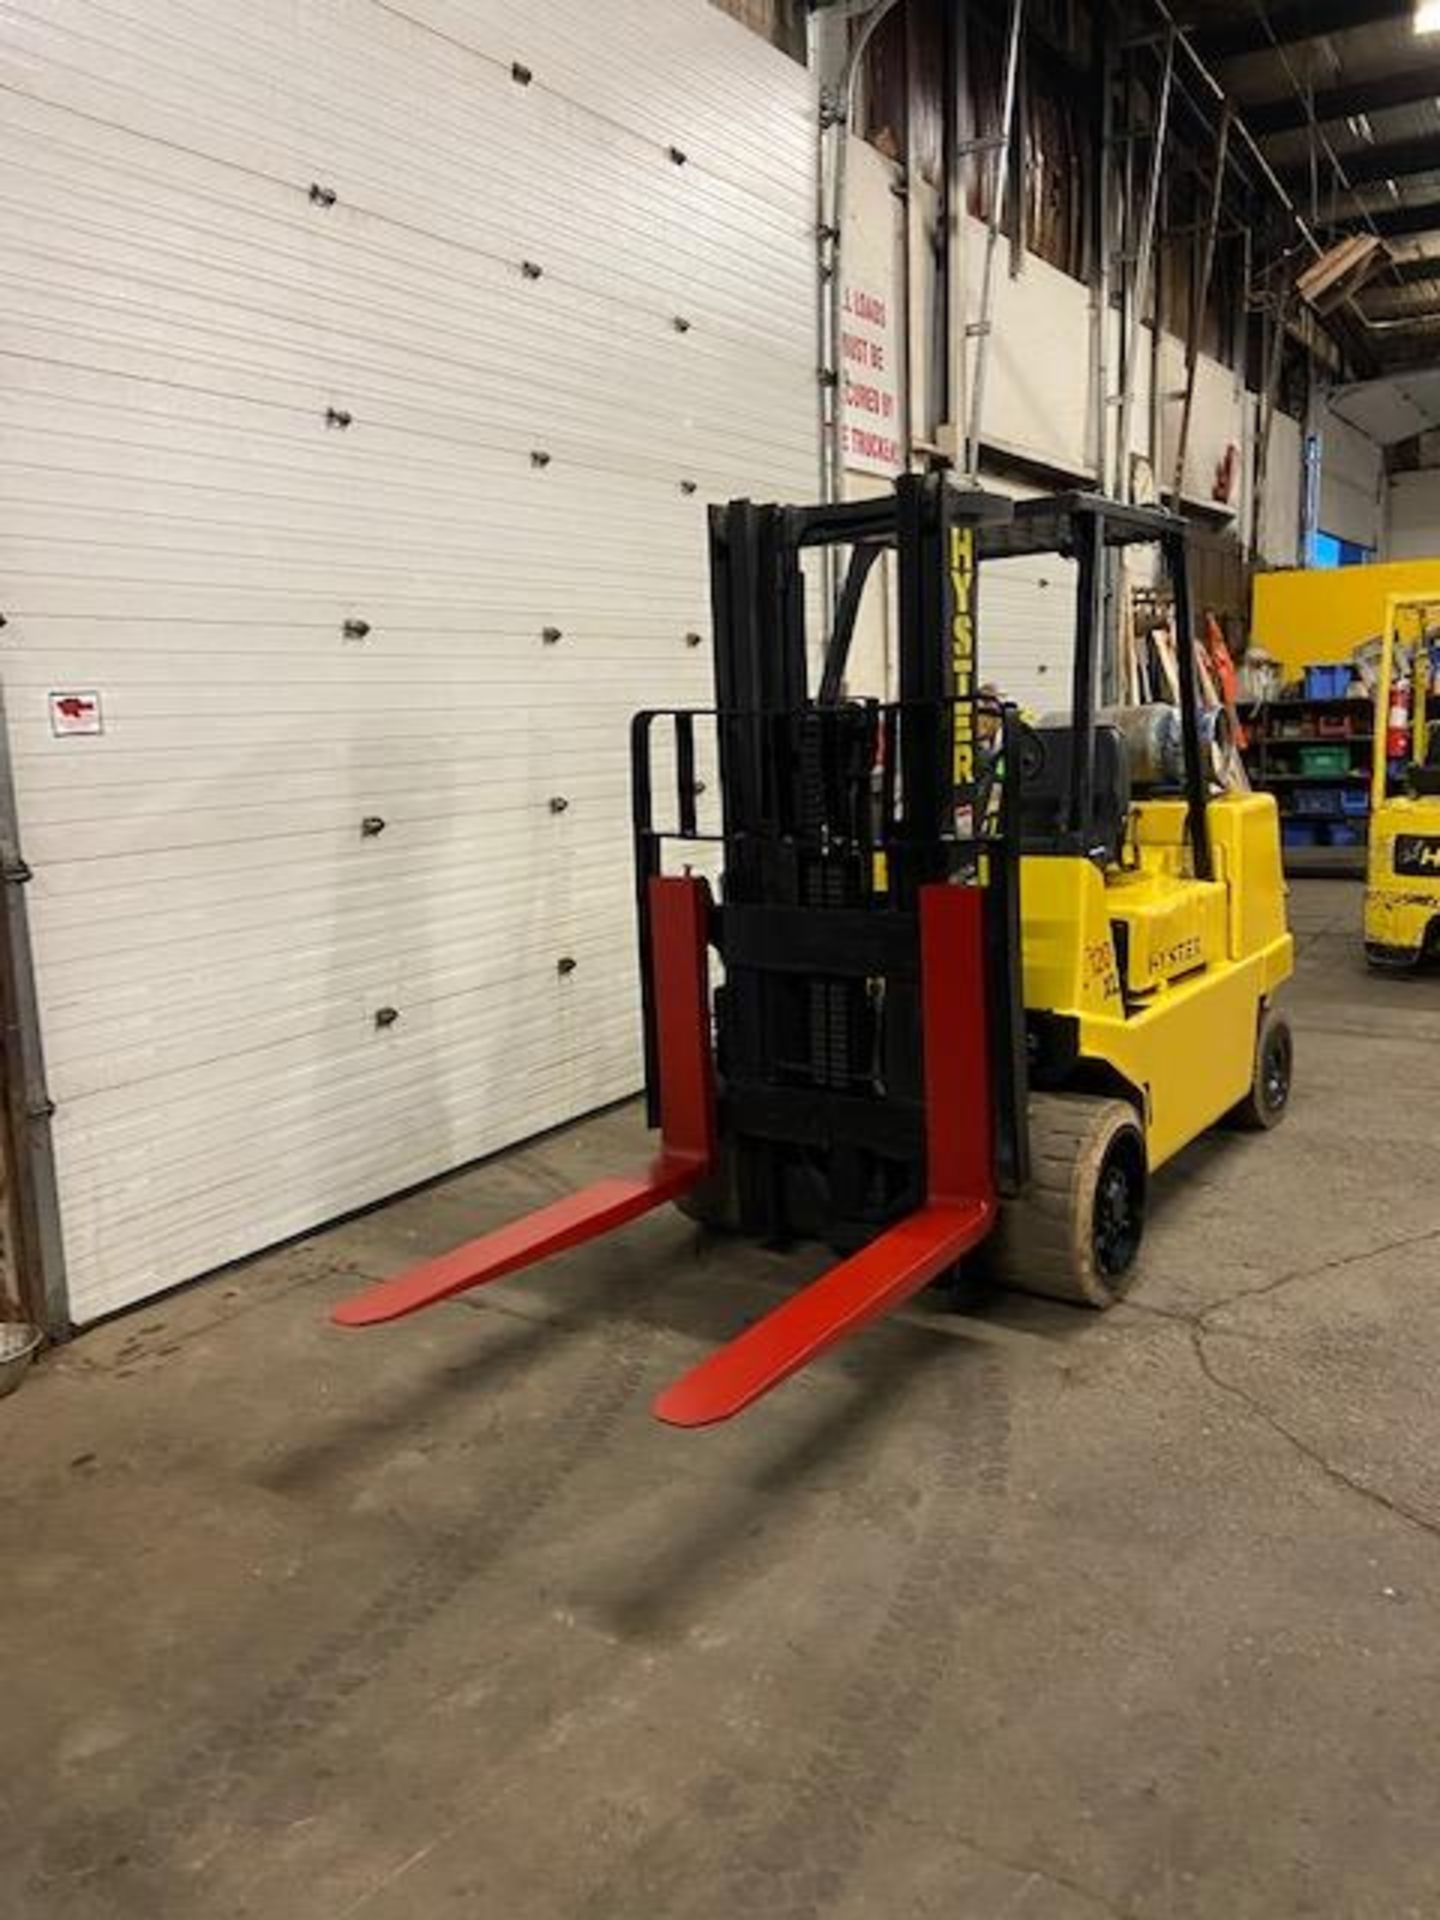 FREE CUSTOMS - Hyster 12000lbs Capacity Forklift 120XL LPG (propane) (no propane tank included) - Image 2 of 3